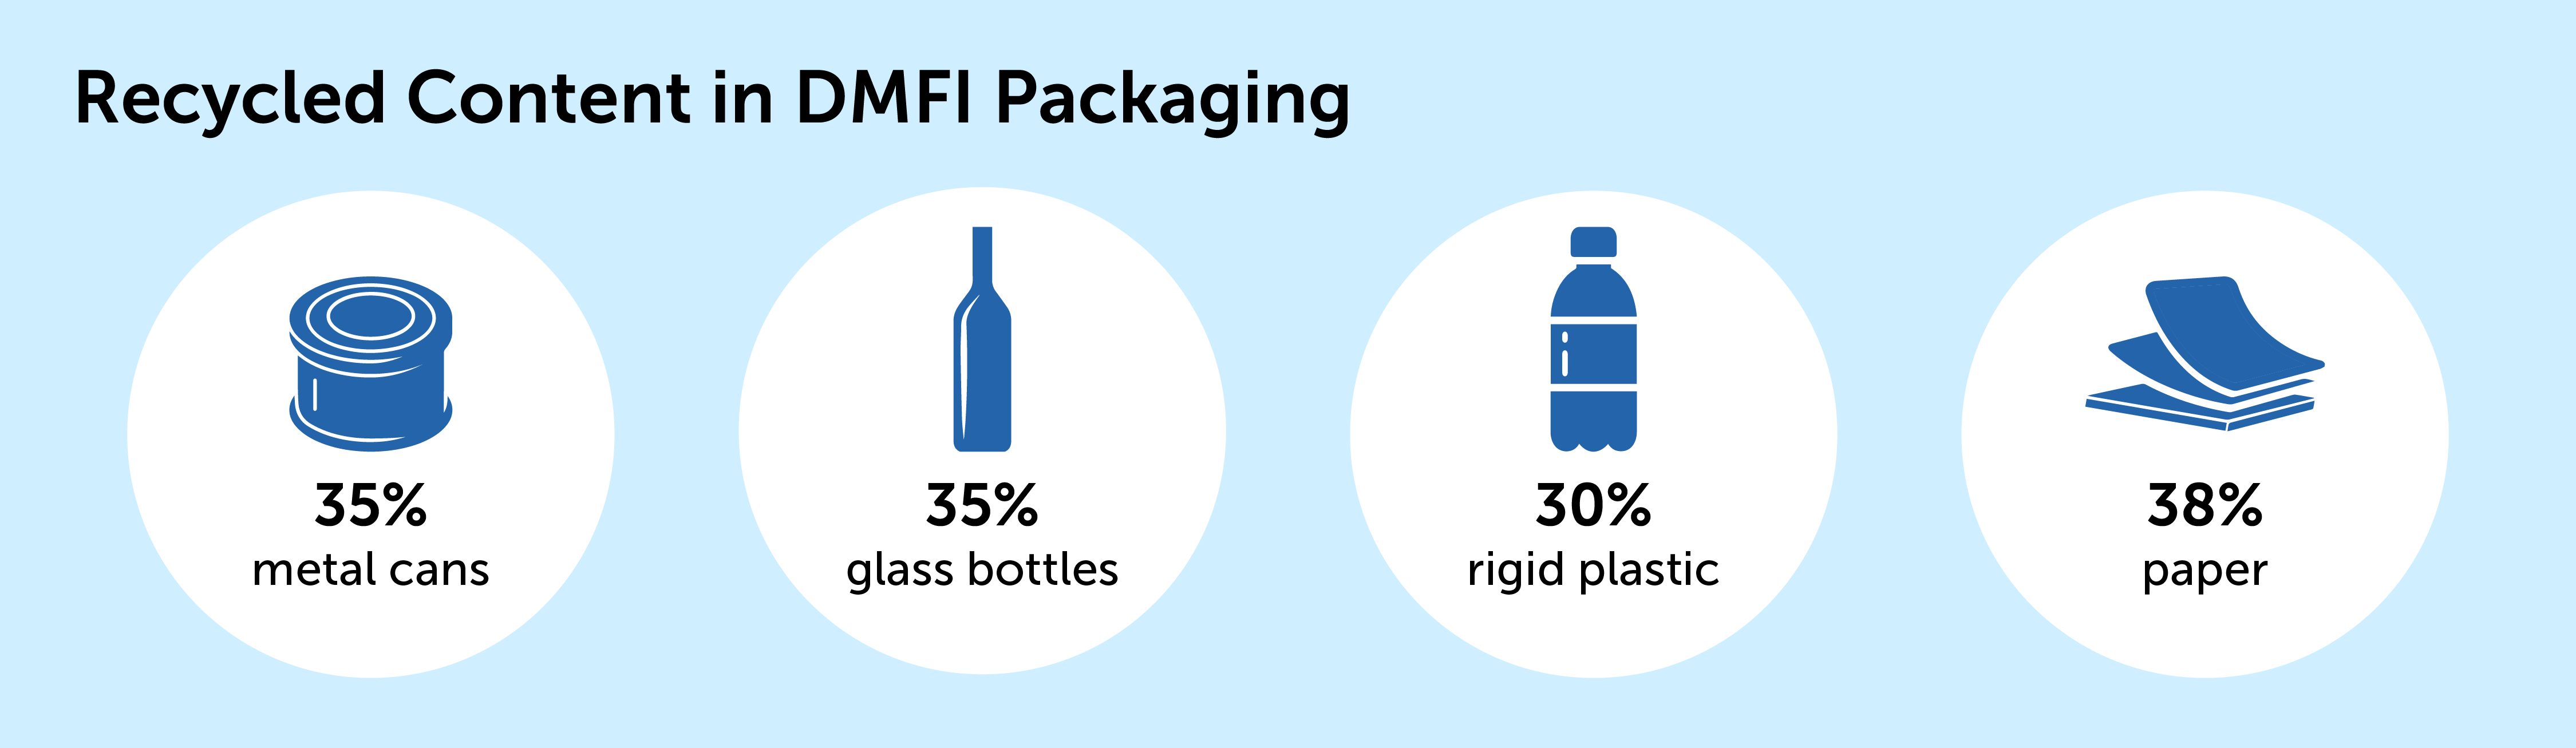 Recycled Content in DMFI Packaging (1)